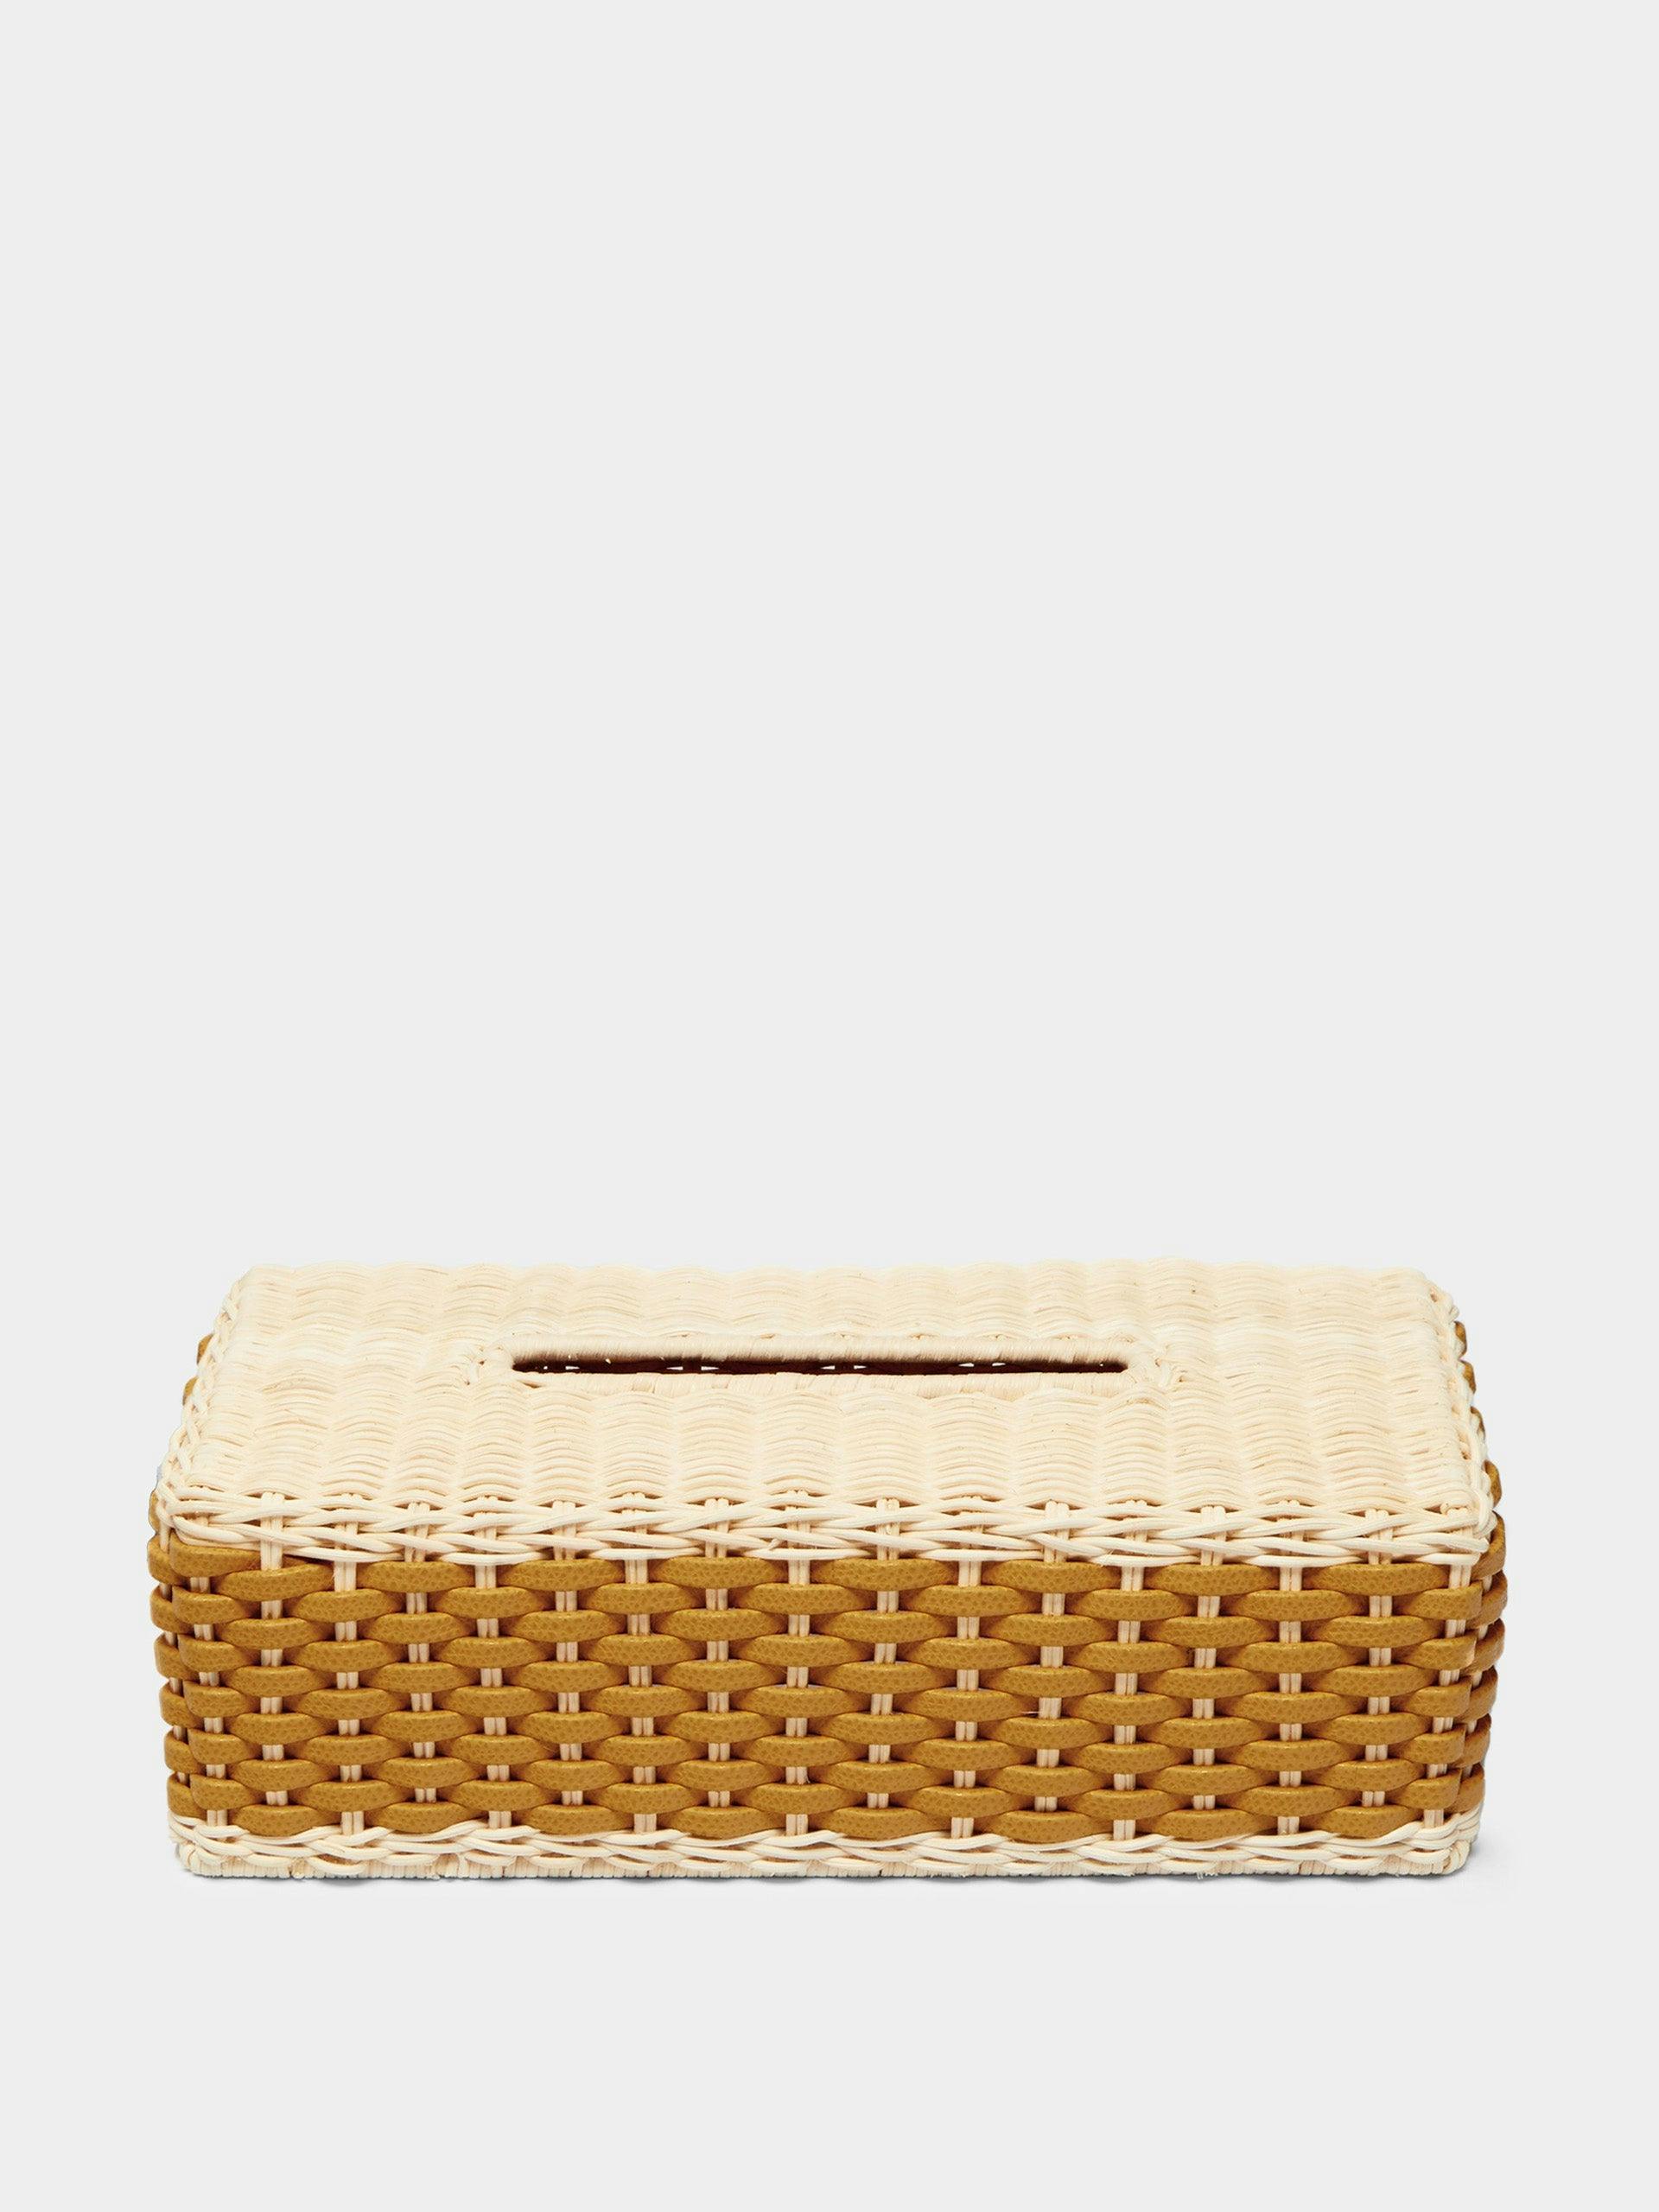 Antibes handwoven leather and rattan tissue box